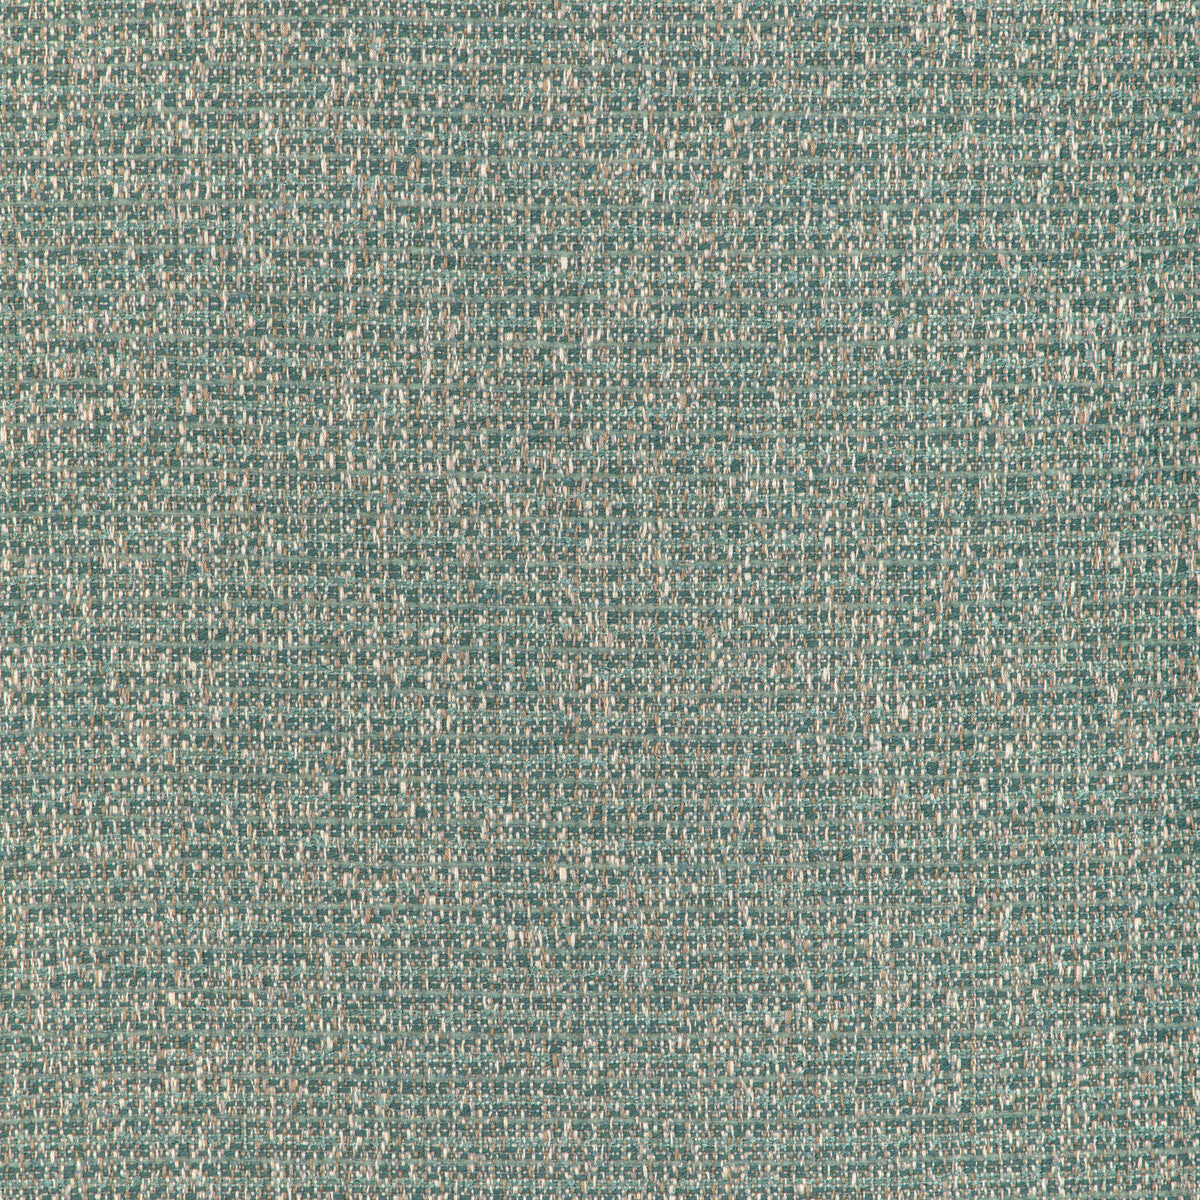 Kravet Design fabric in 37156-13 color - pattern 37156.13.0 - by Kravet Design in the Woven Colors collection